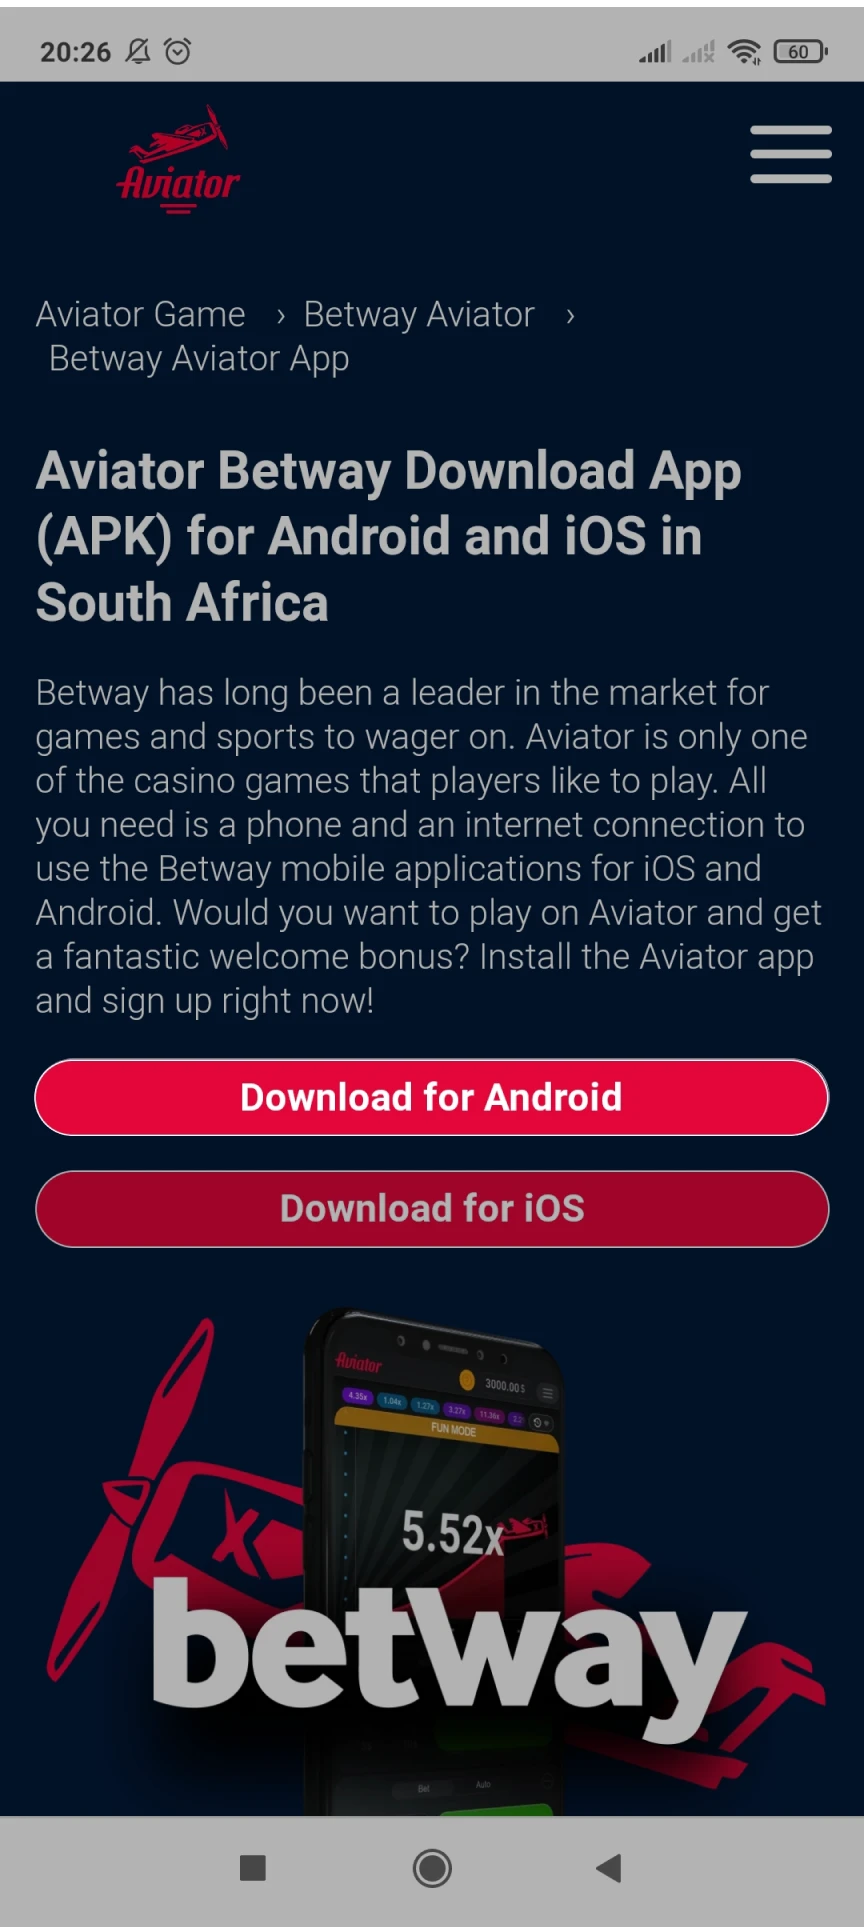 Follow the link to download the Betway application on Android.